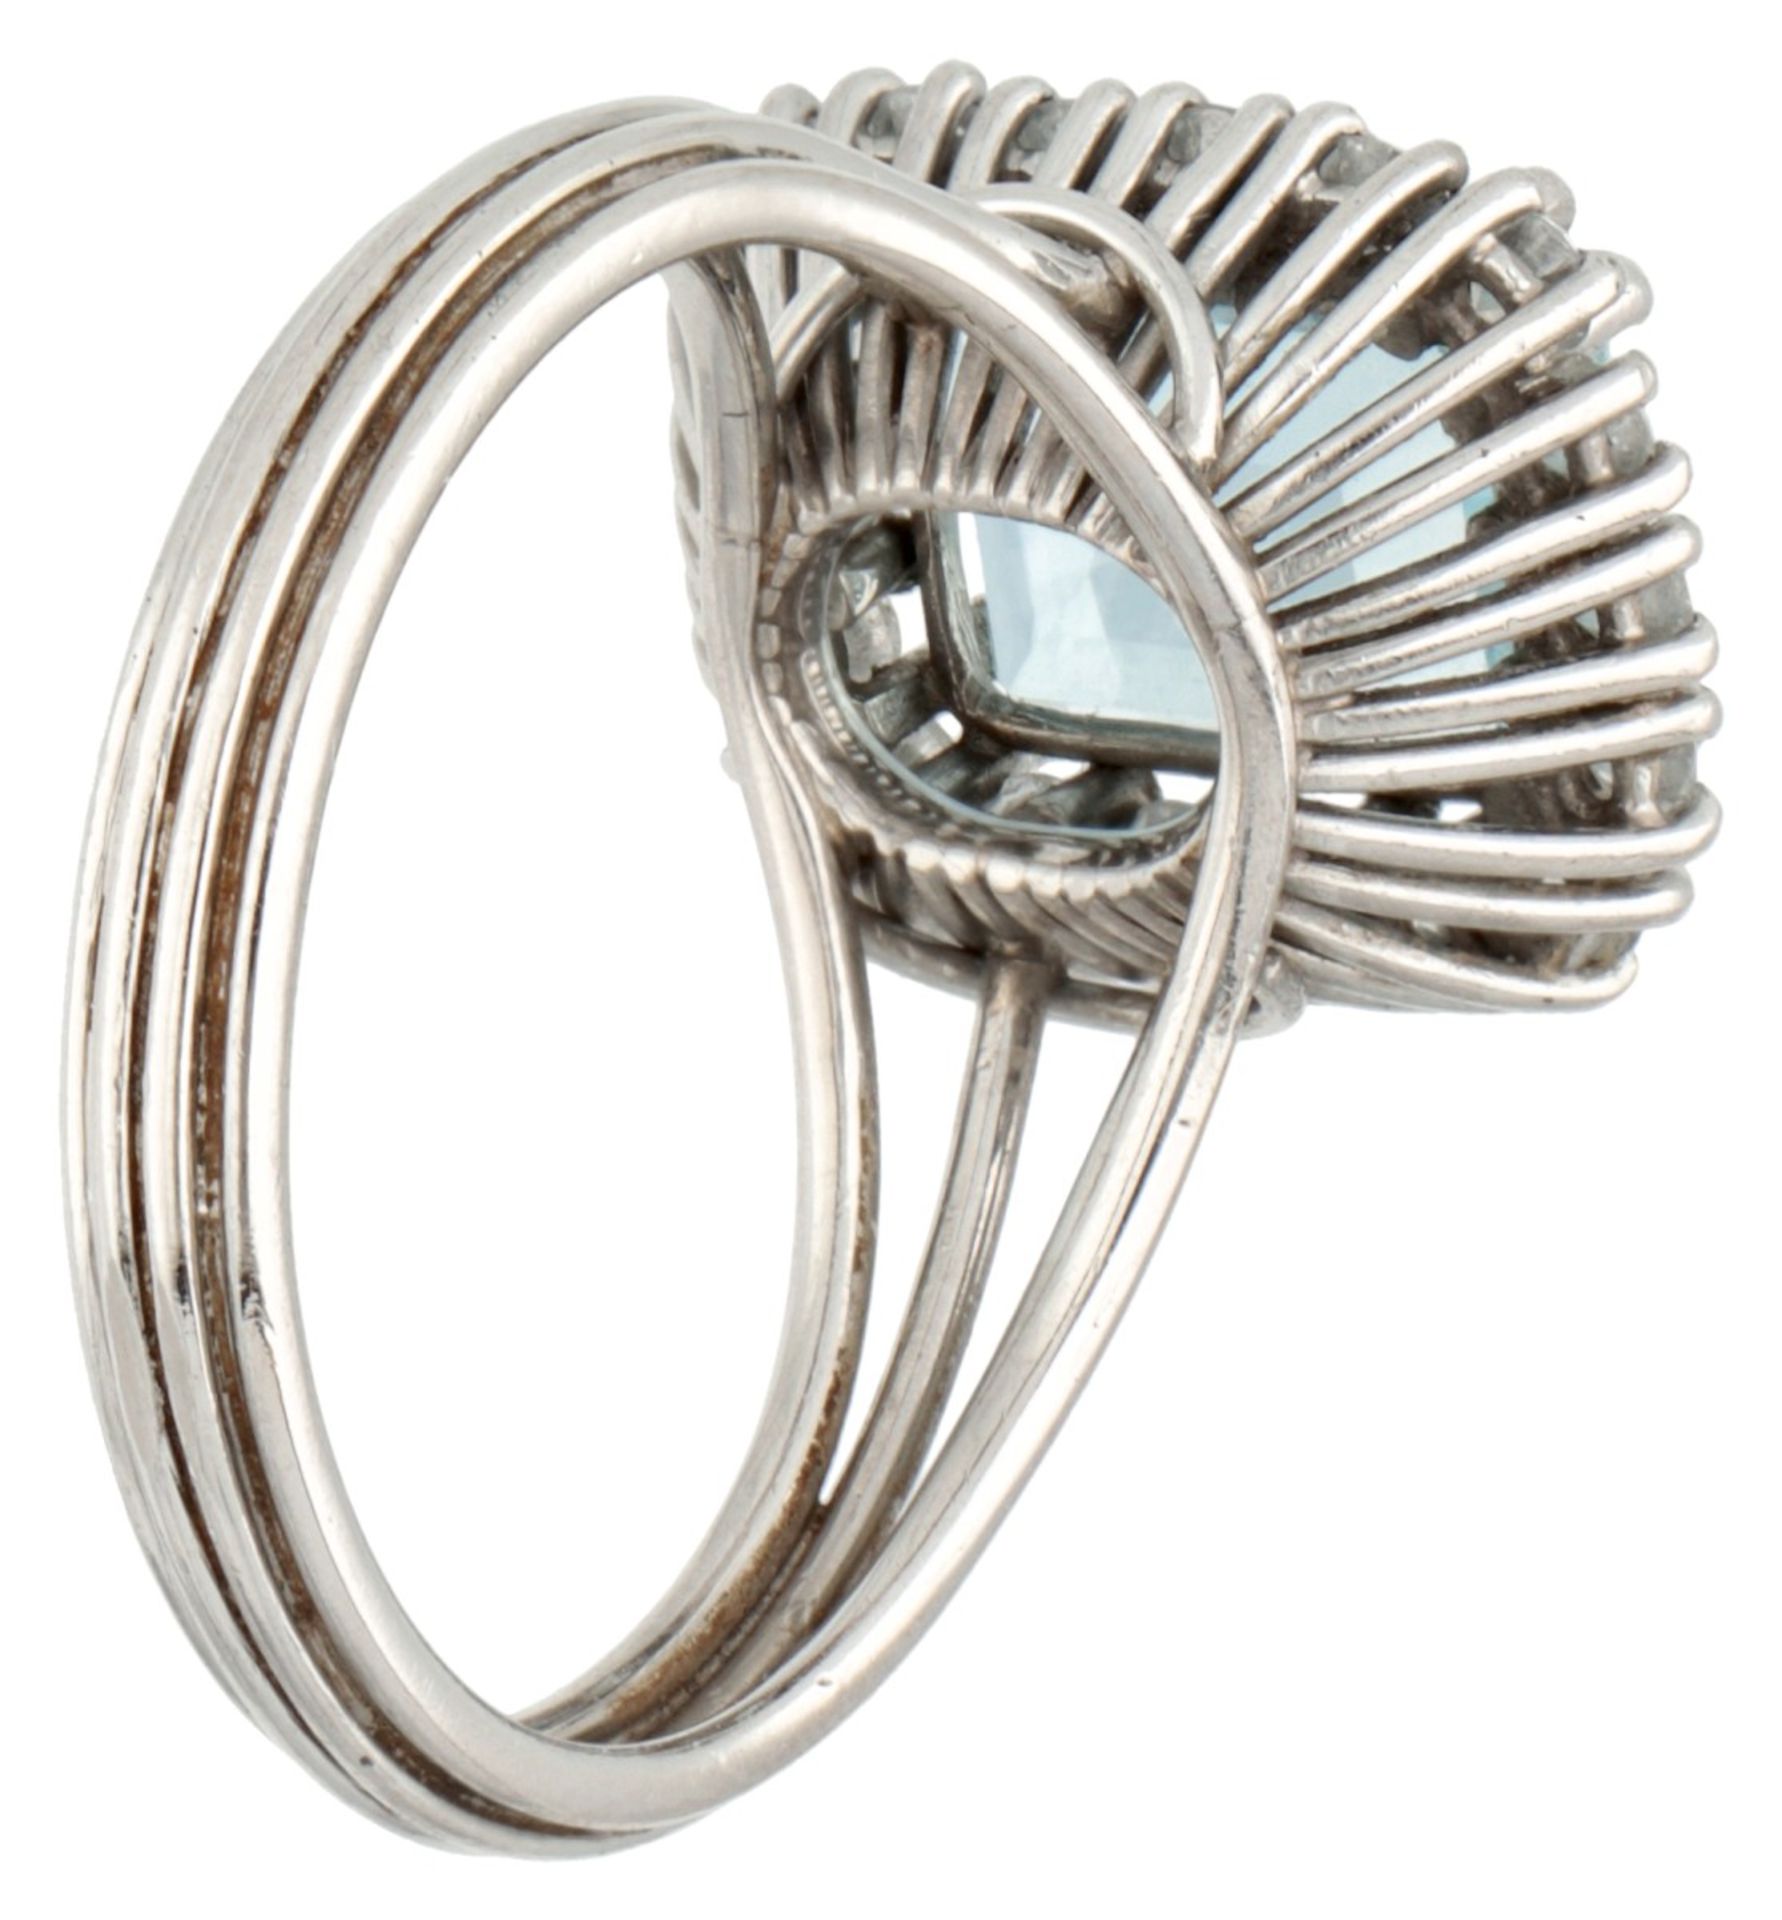 Pt 900 Platinum entourage ring set with approx. 2.31 ct. aquamarine and approx. 0.72 ct. diamond. - Image 2 of 2